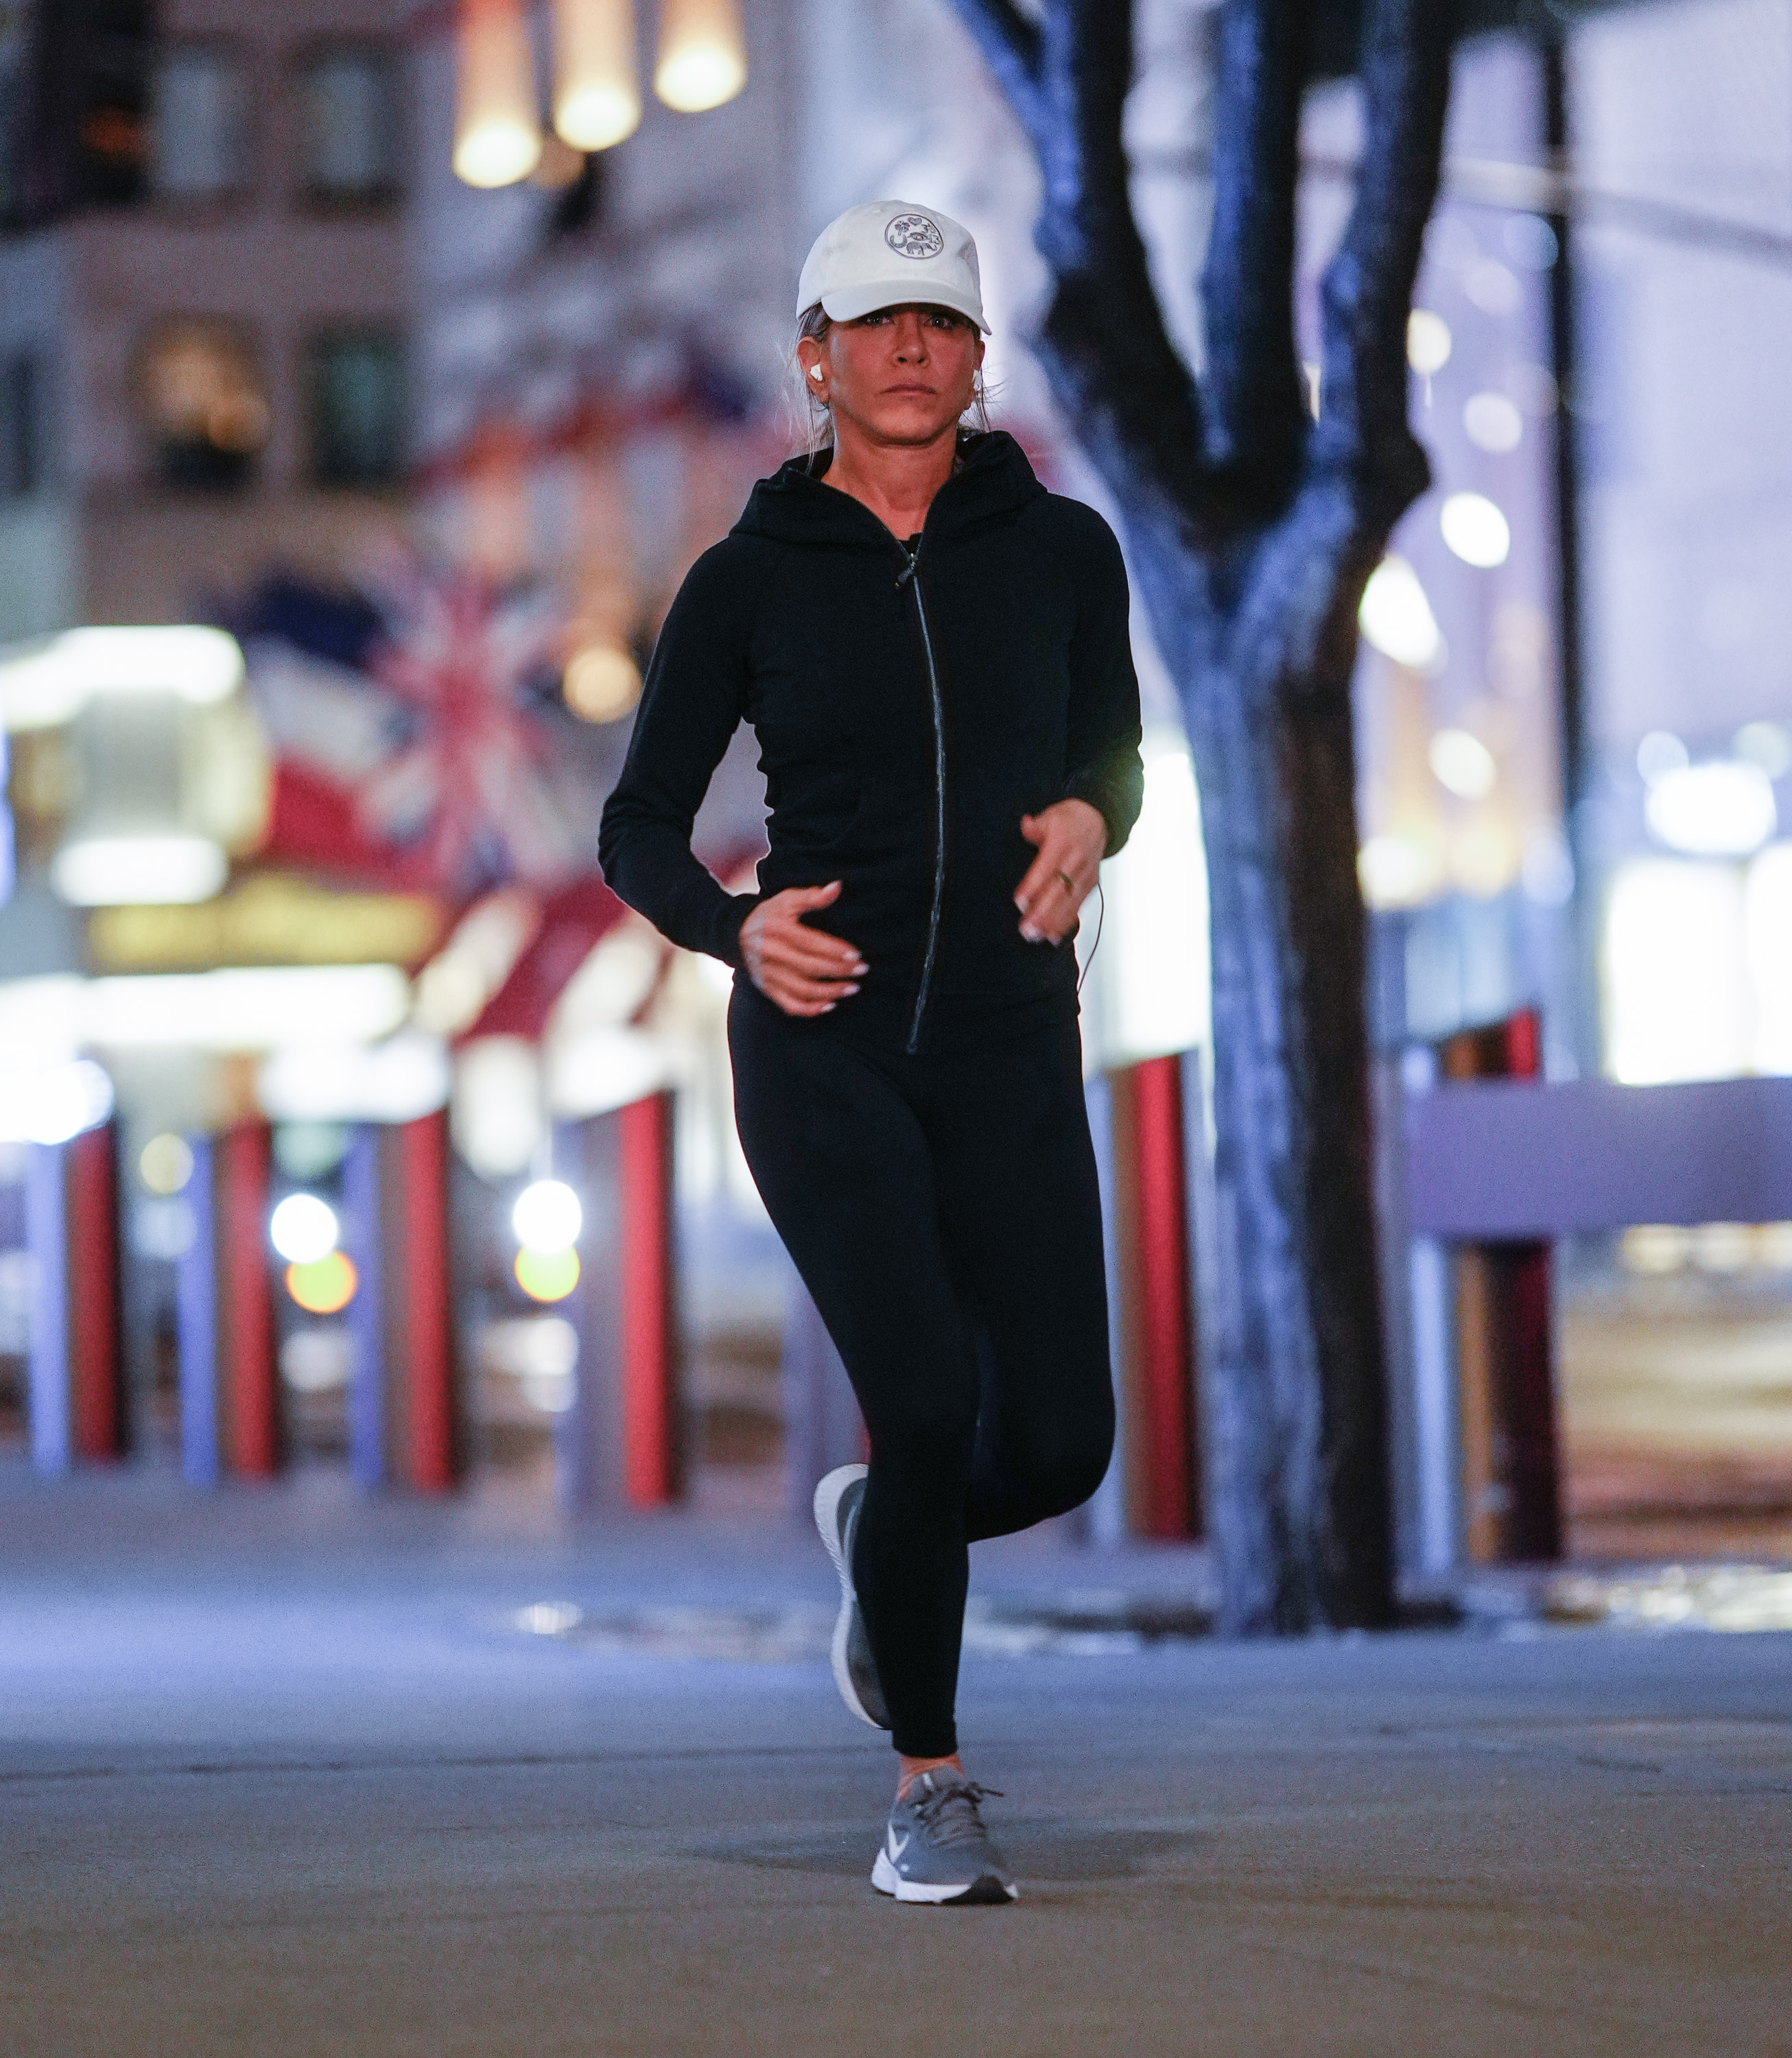 Jennifer Aniston jogging in New York in September 2022 | Source: Getty Images